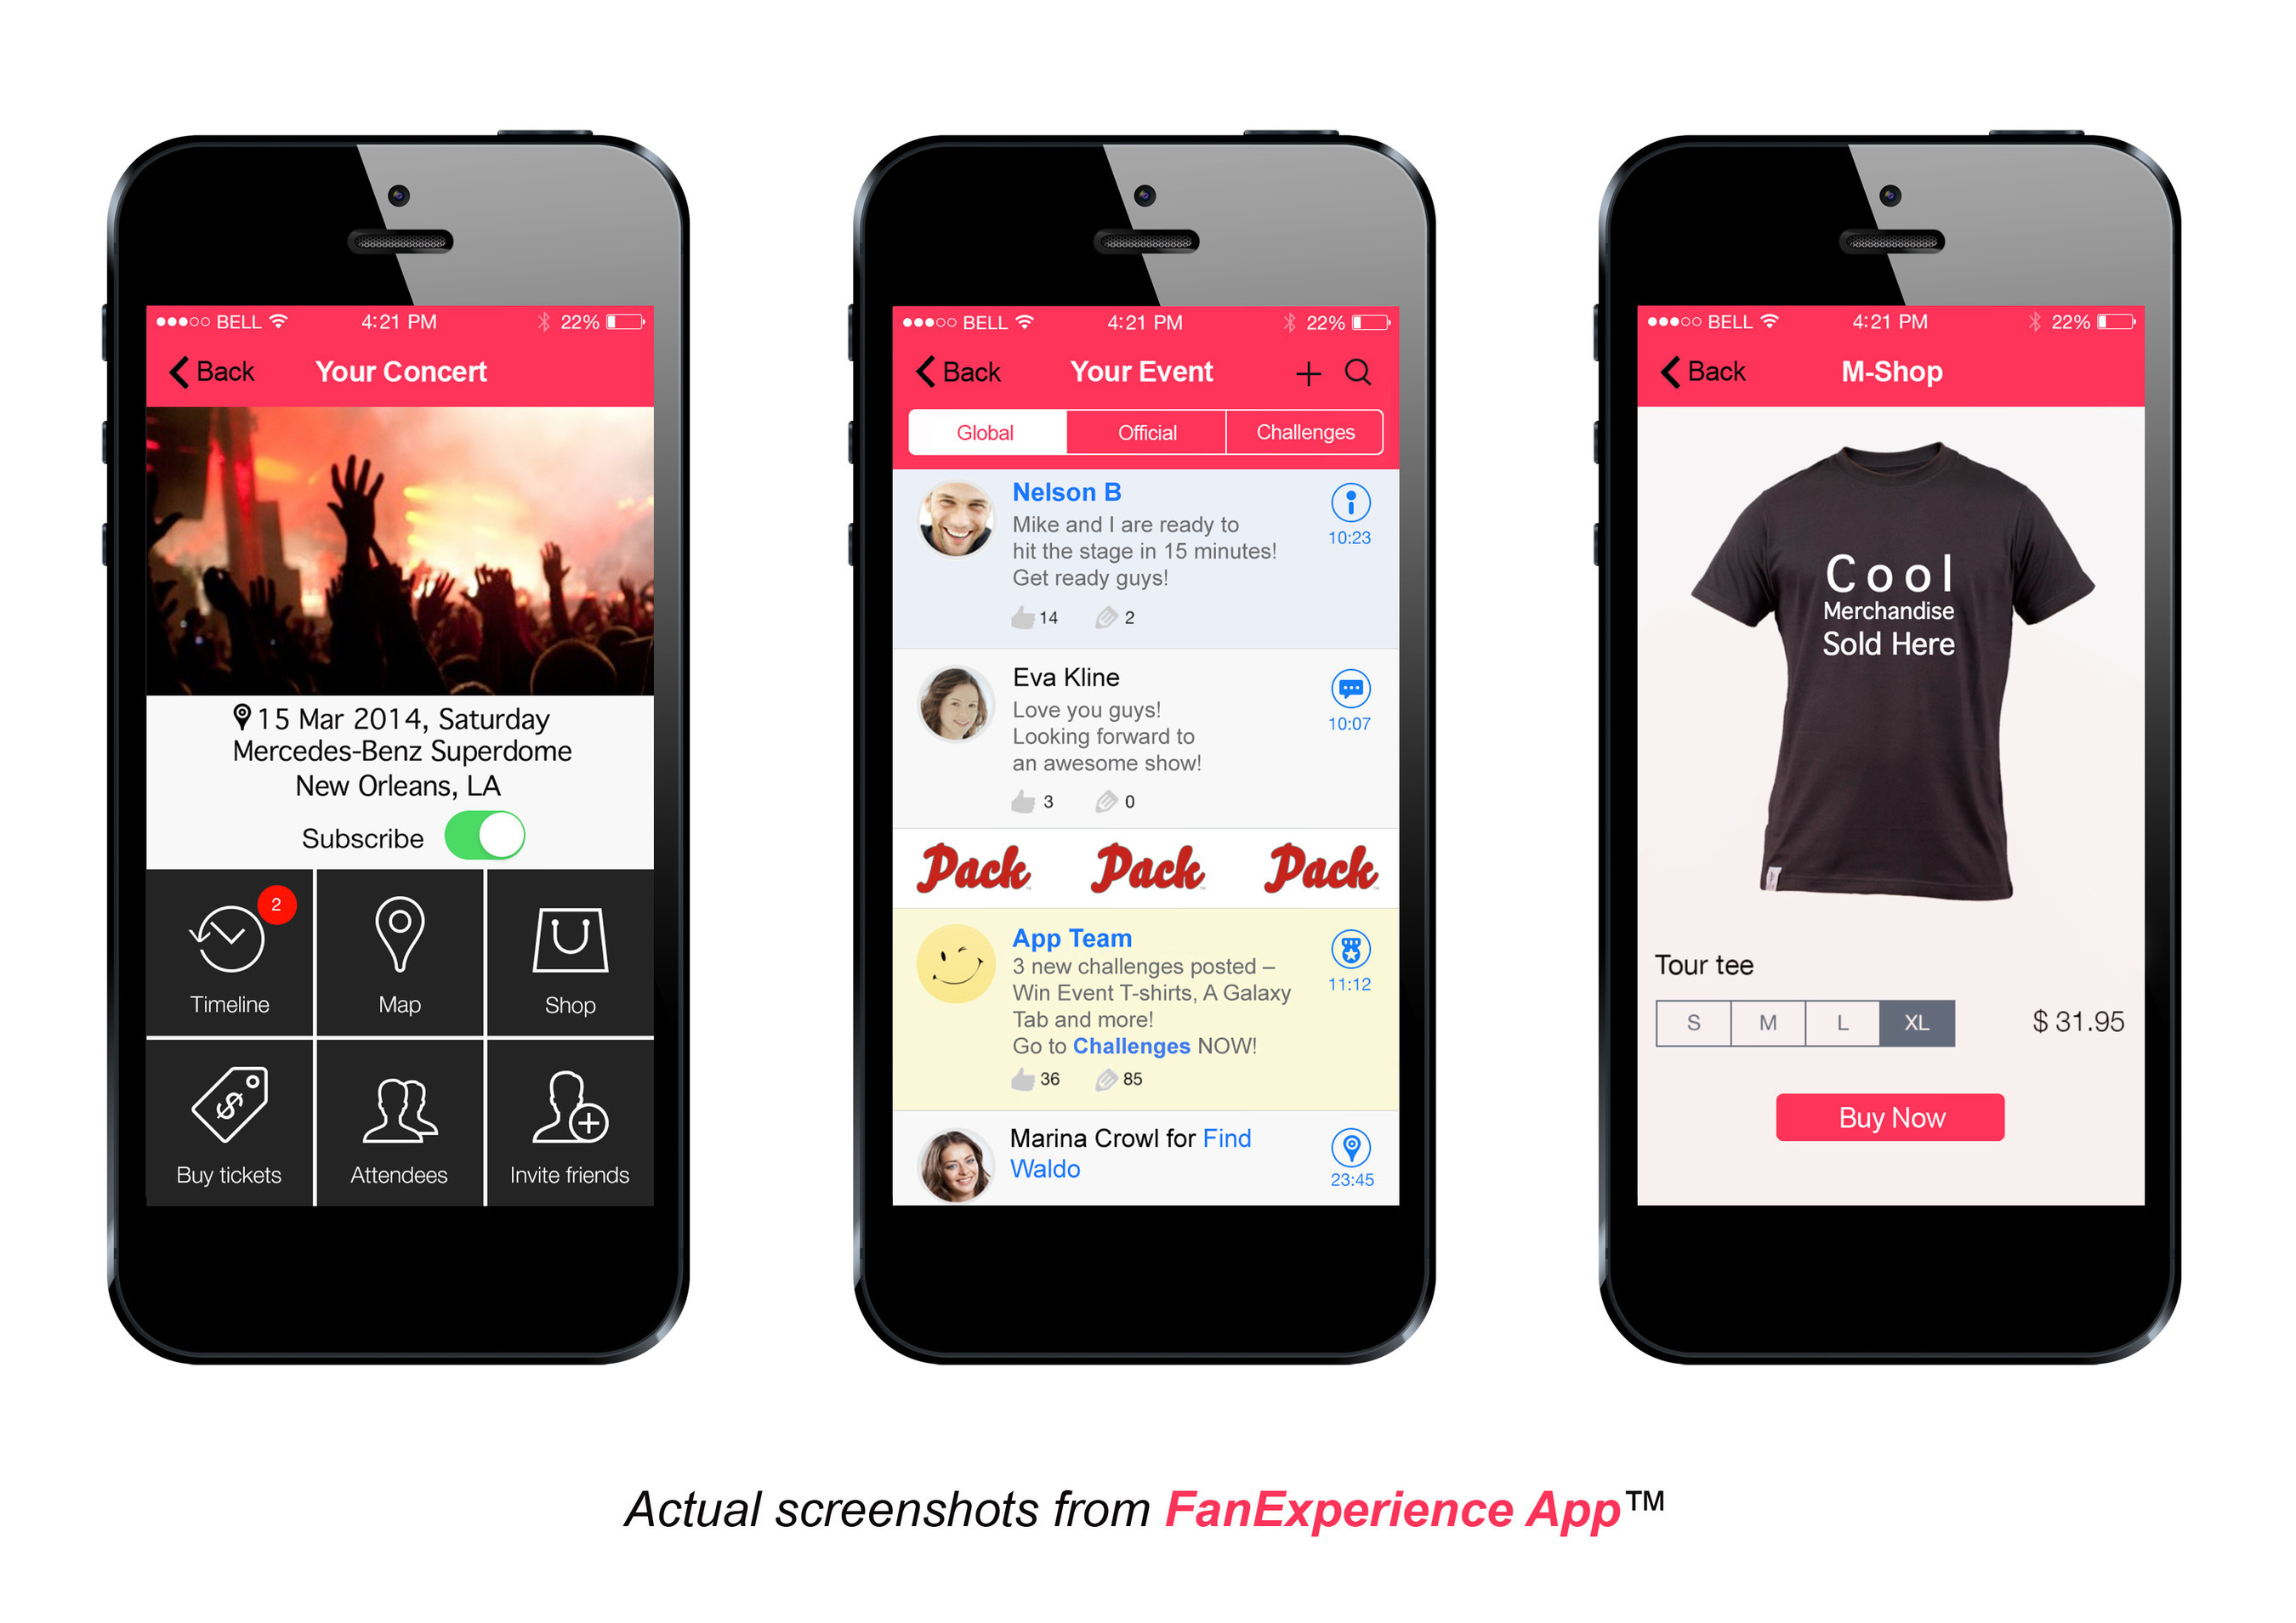 FanExperience App screenshots - Welcome Page, Timeline view and mobile shop (PRNewsFoto/Pack Events)